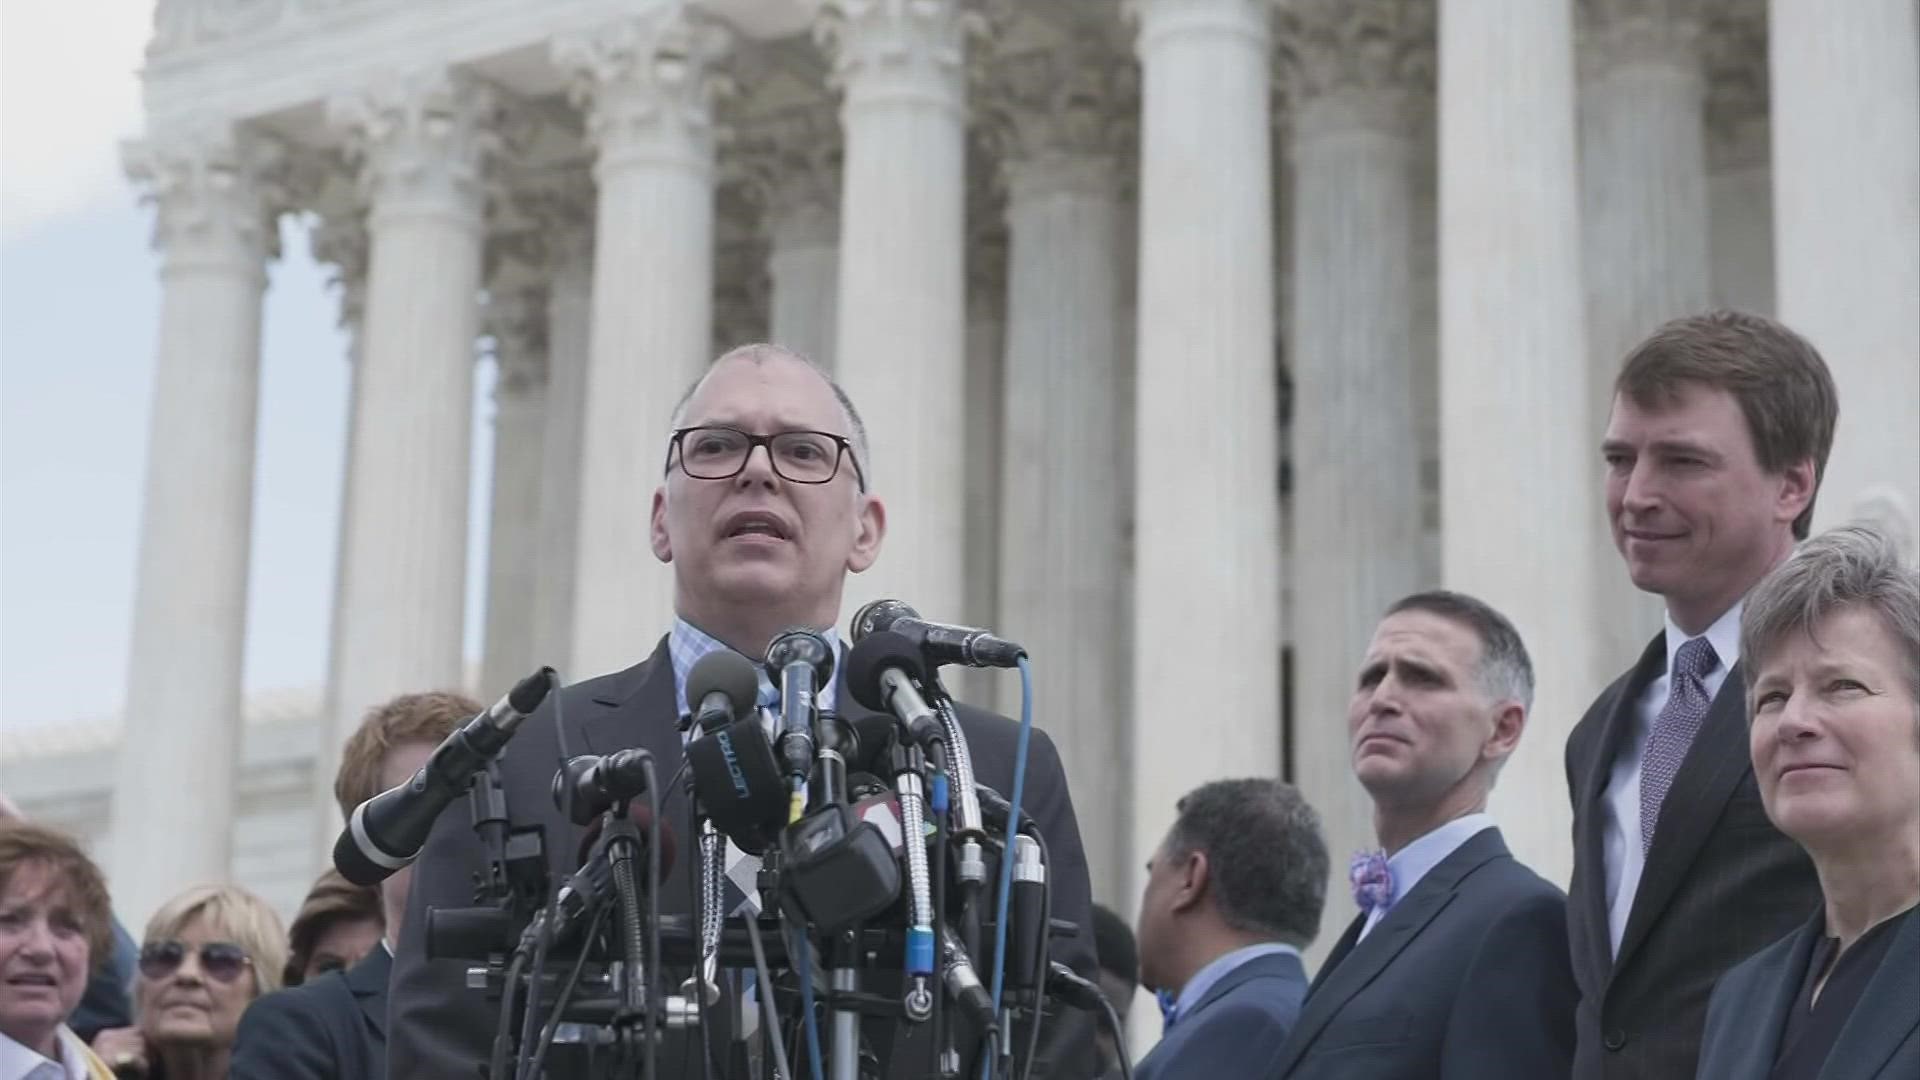 Obergefell made the official announcement Tuesday, detailing his plans to represent voters in the 89th District.